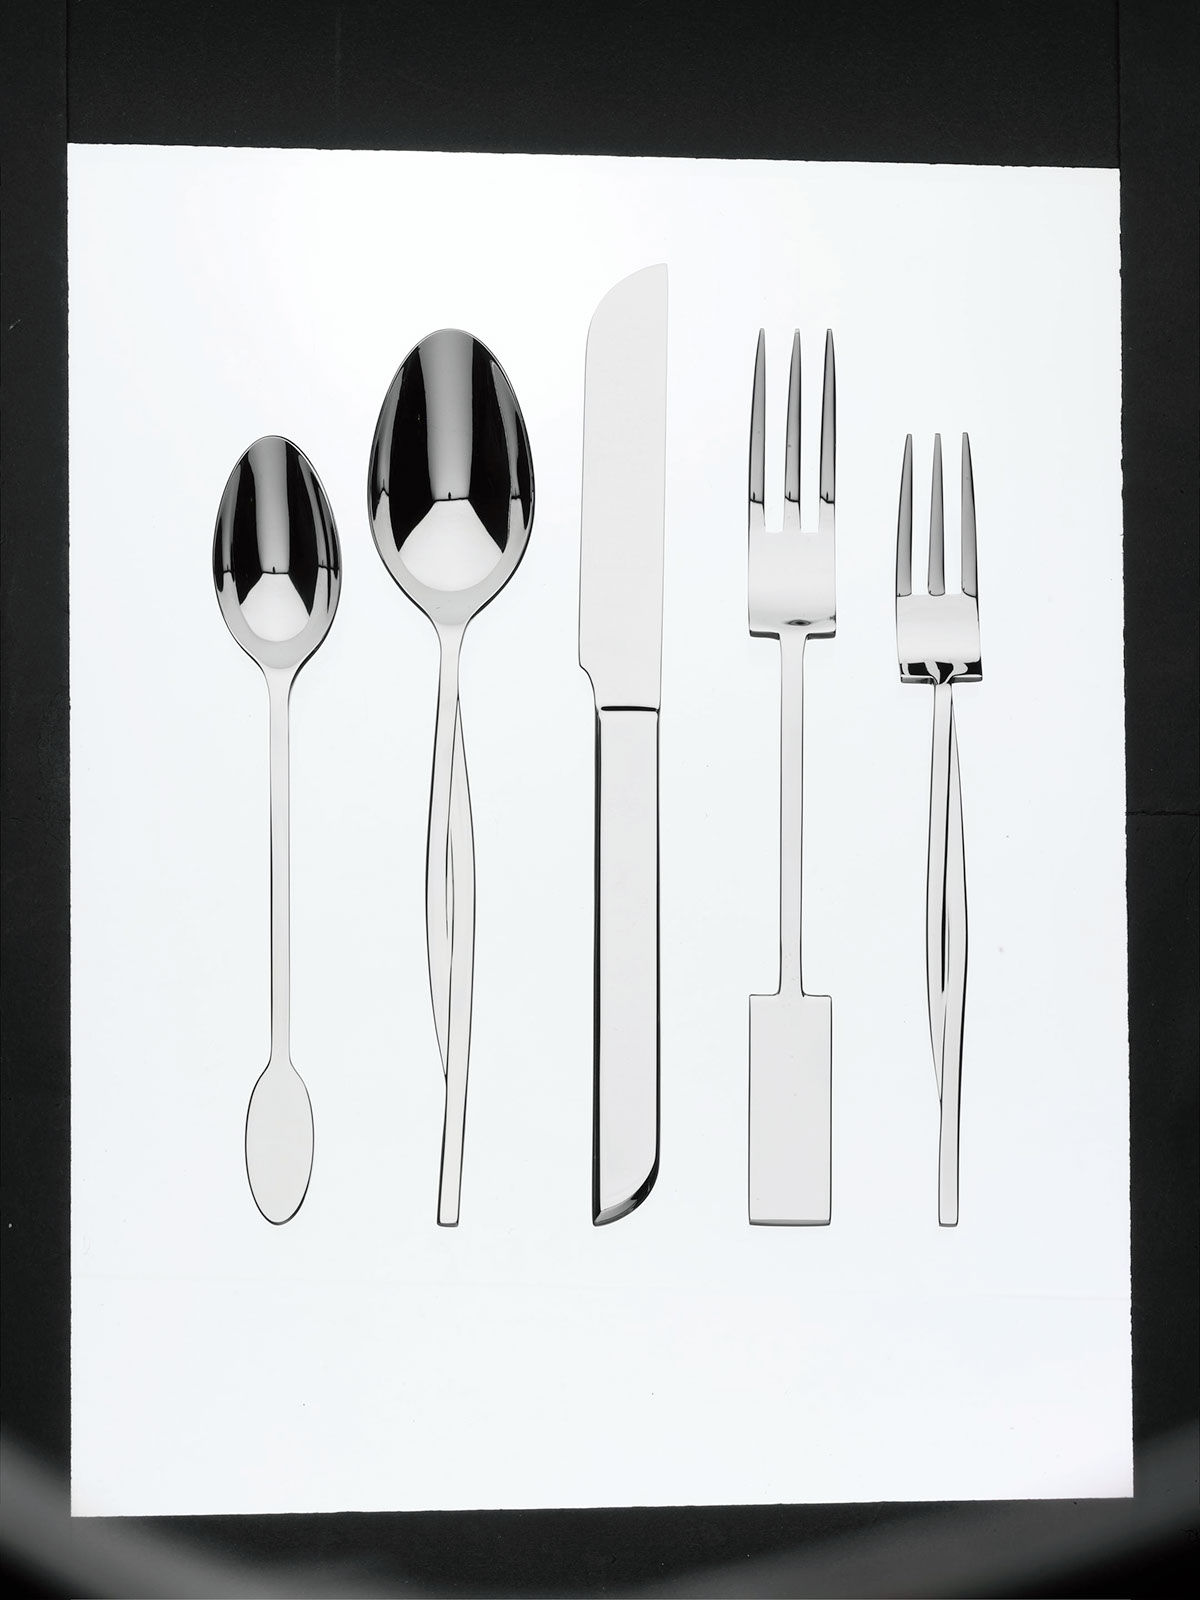 flatware target gourmet settings stainless steel goth gs army hybrids Shadows colonial ghost Award winning design Innovative